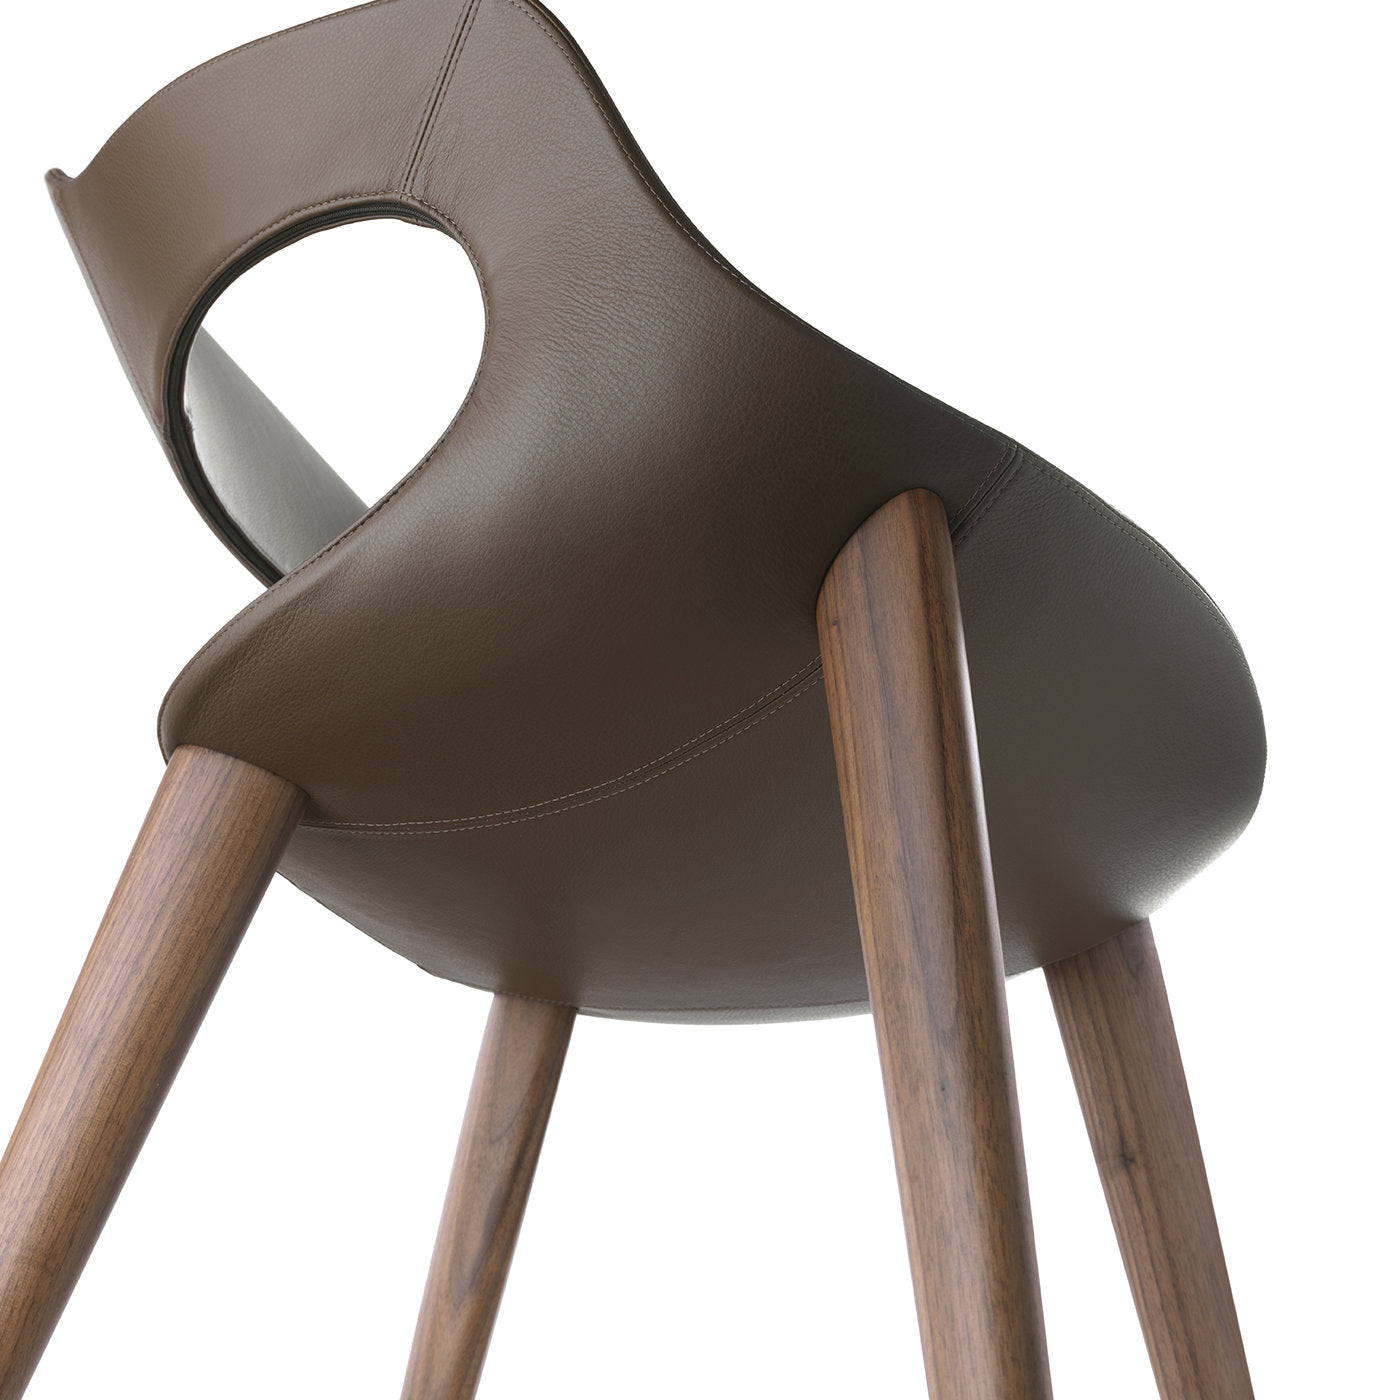 Frenchkiss High-Backed Wooden-Legged Chair by Stefano Bigi - Alternative view 2